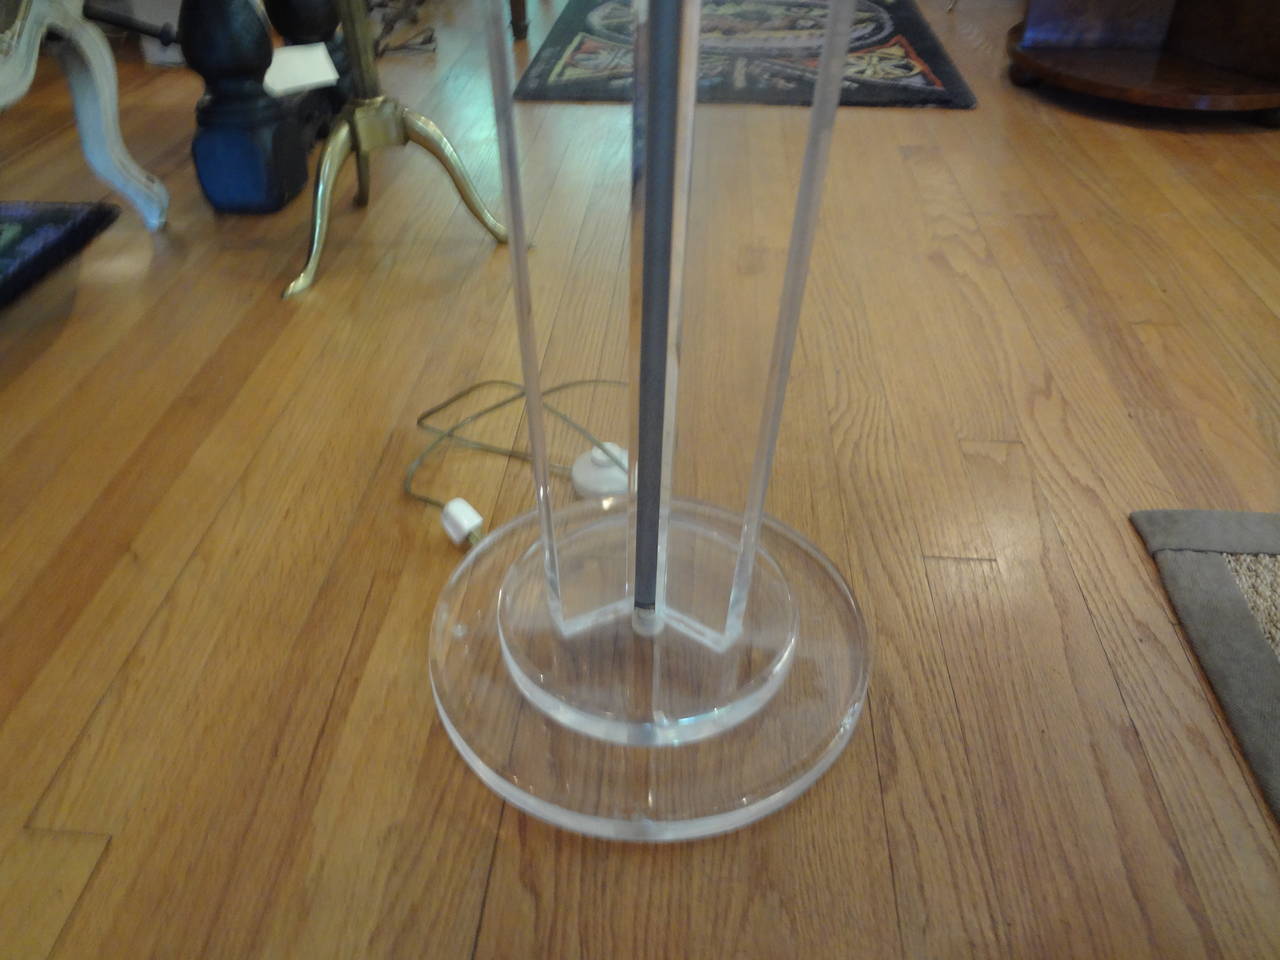 Mid-Century Modern lucite floor lamp or torchiere.
Neoclassical style acrylic floor torchère or floor lamp. This midcentury lucite floor lamp has a gunmetal grey sphere and shade.


